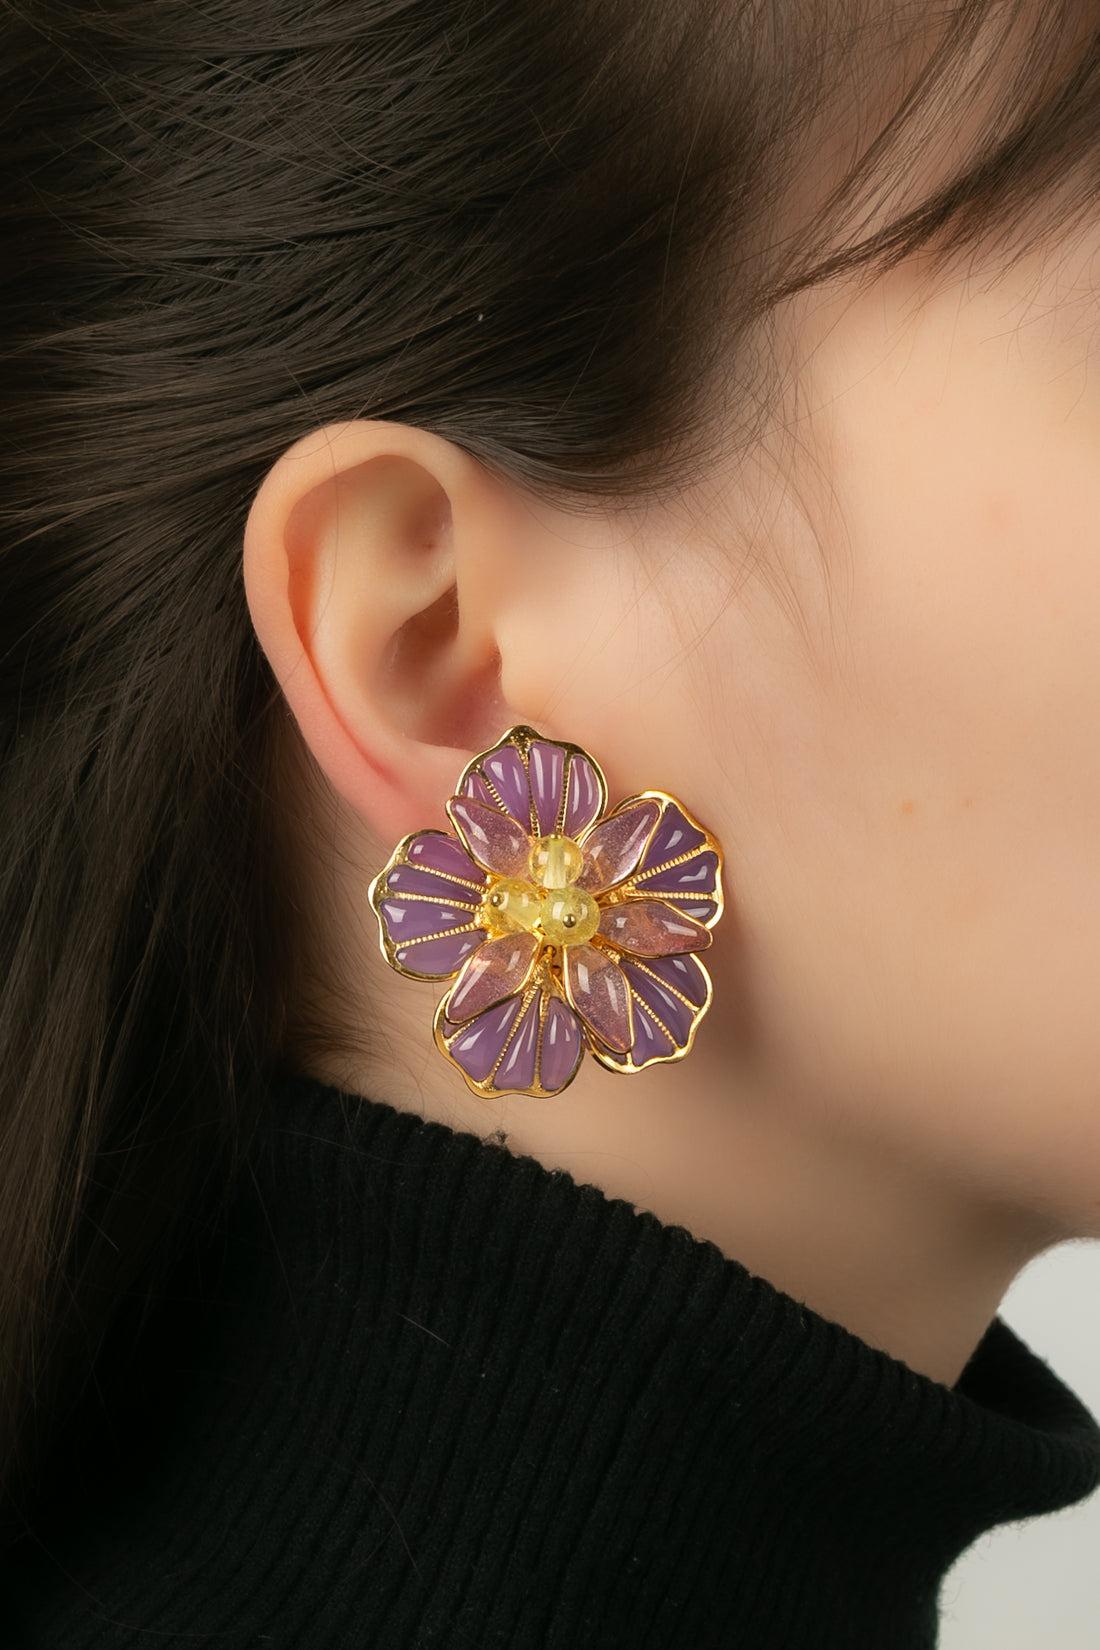 Augustine - Golden metal and purple and pink glass paste earrings.

Additional information:
Condition: Very good condition
Dimensions: Height: 4 cm

Seller Reference: BO106